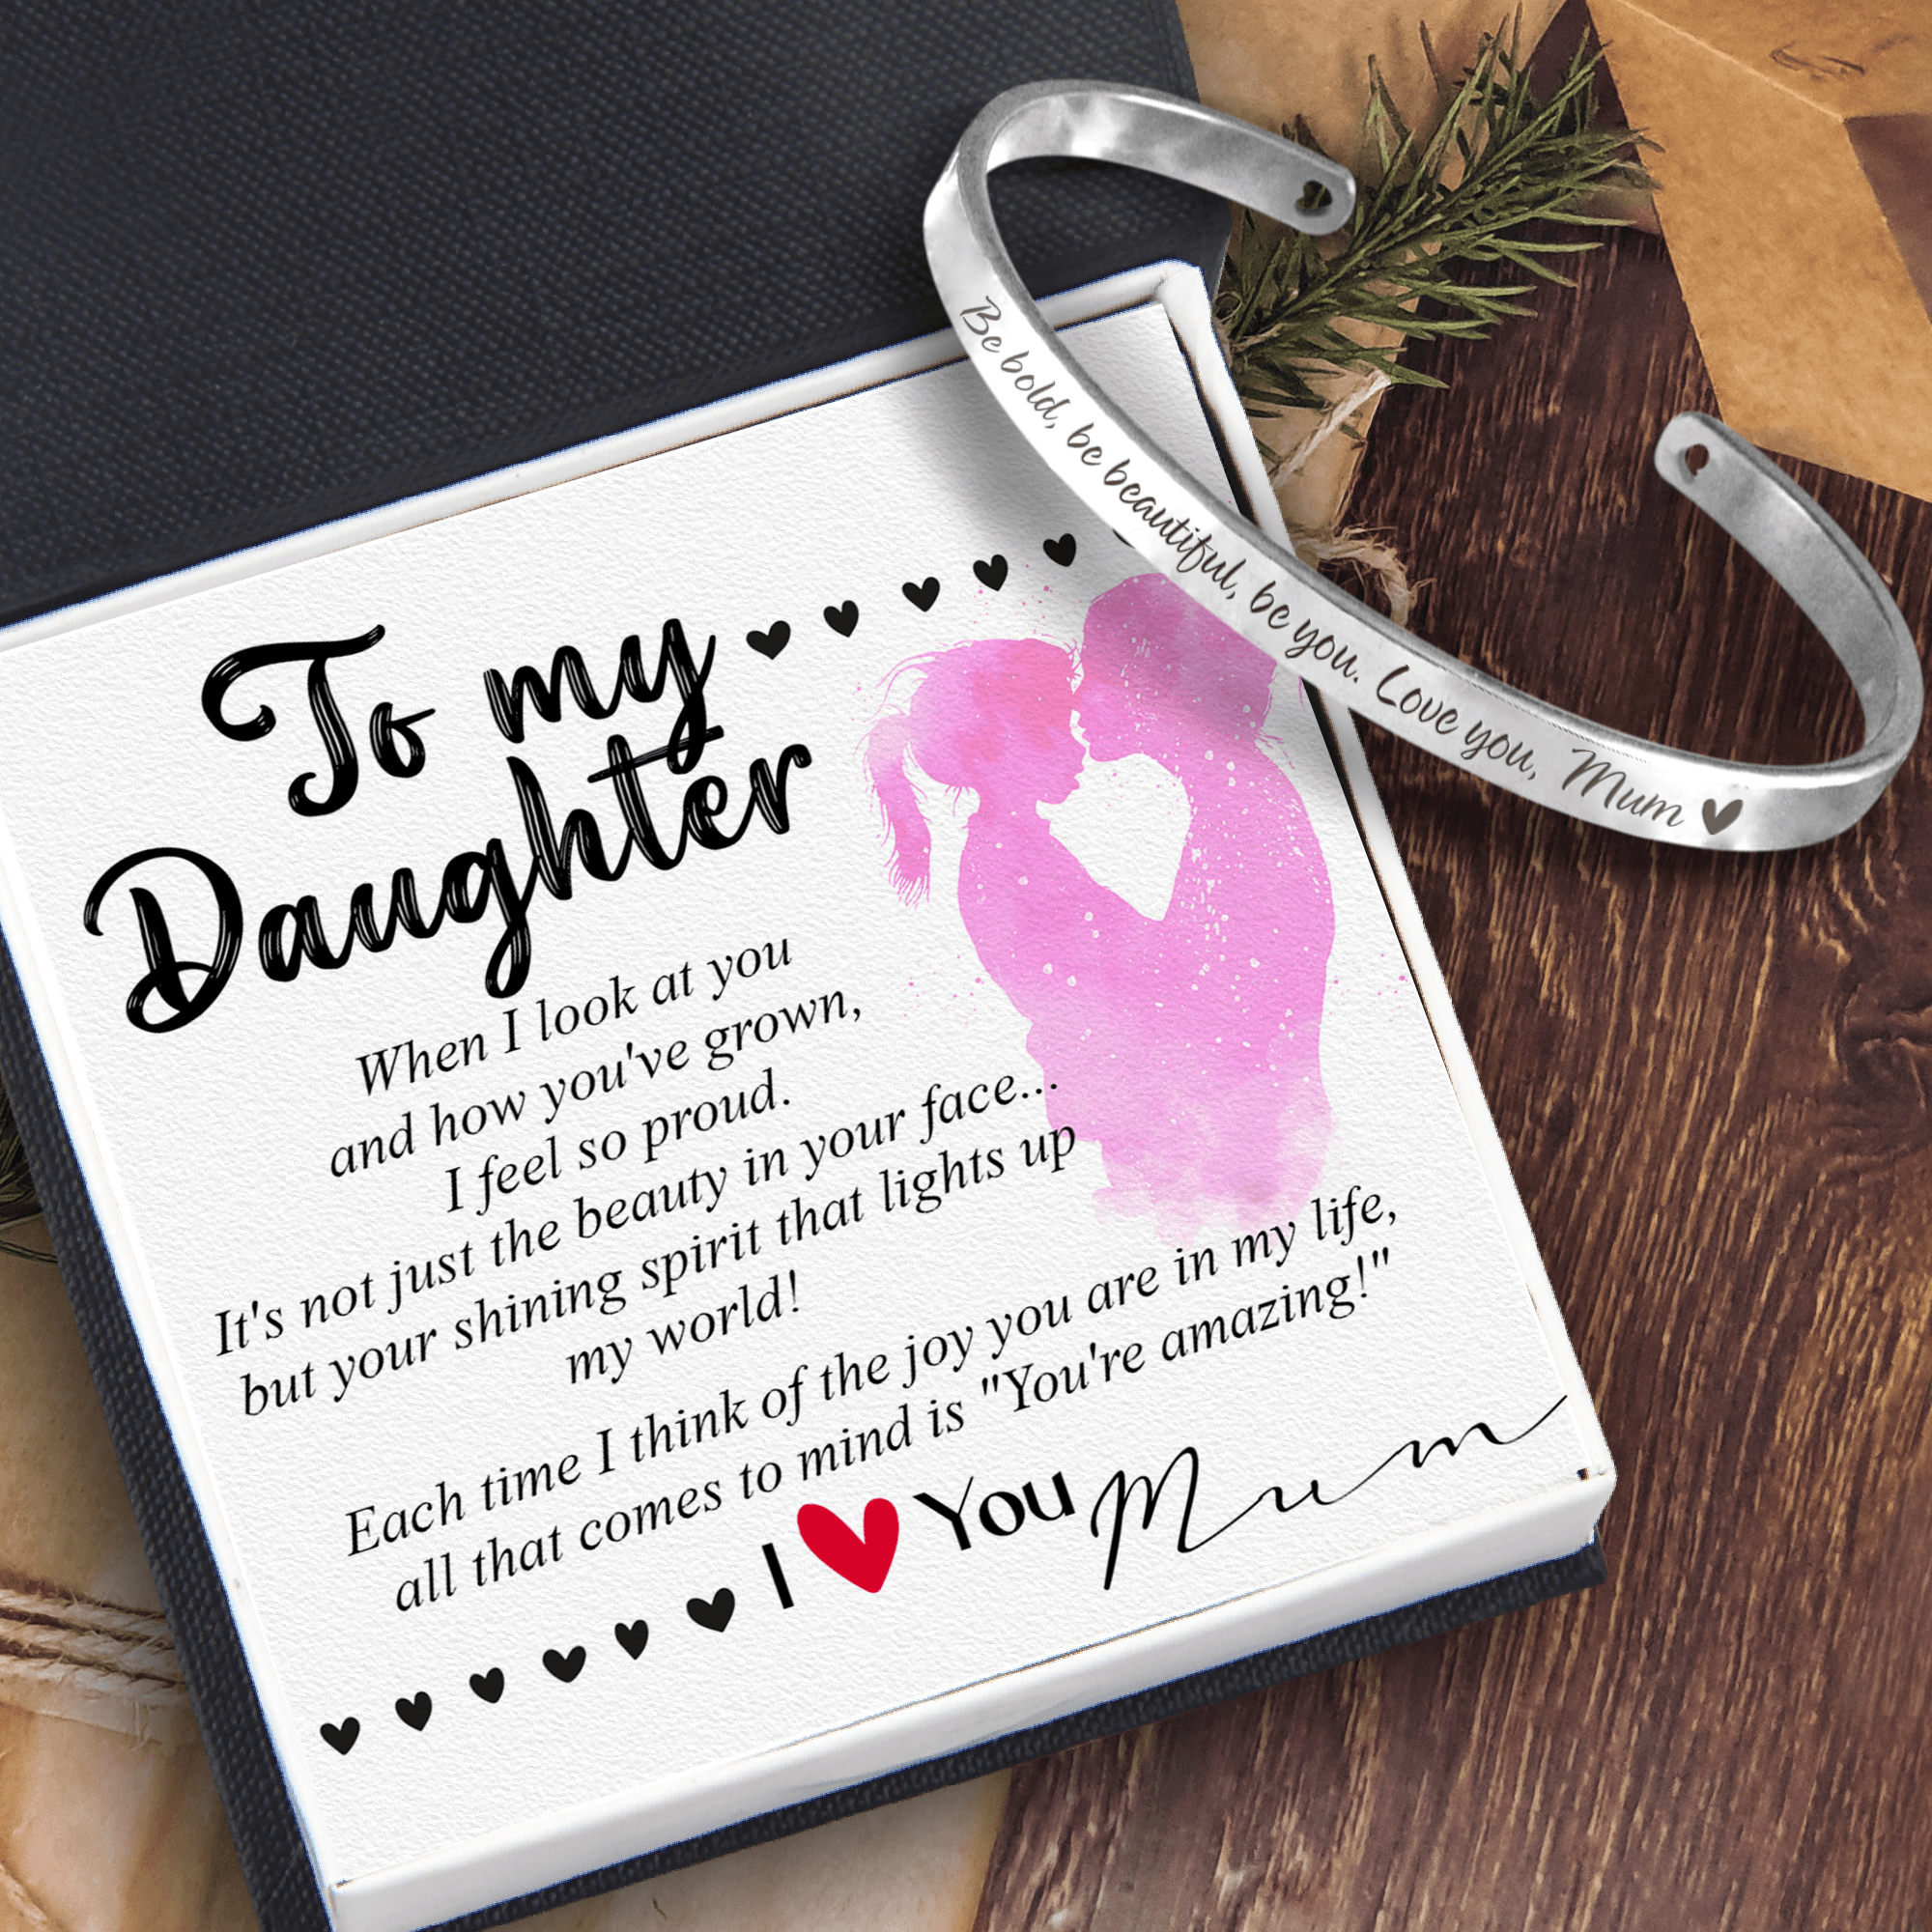 Daughter's Bracelet - Family - From Mum - To My Daughter - When I Look At You And How You've Grown, I Feel So Proud - Augbzf17020 - Gifts Holder